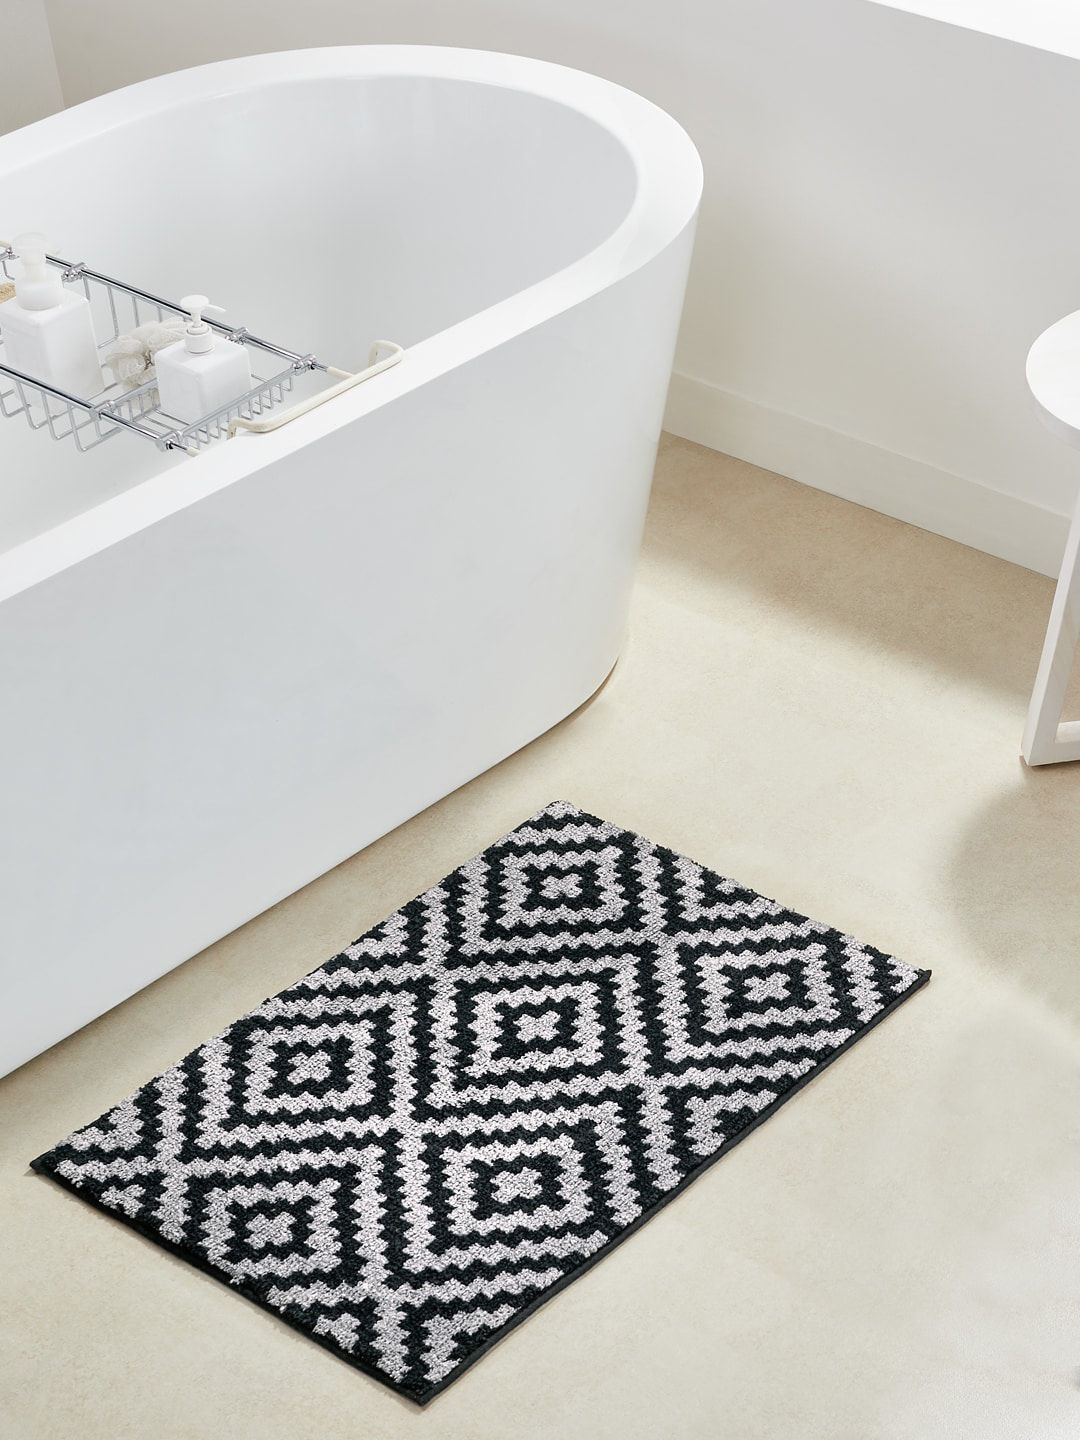 Pano Black & White Knitted 1902 GSM Anti-Skid Bath Rugs Price in India